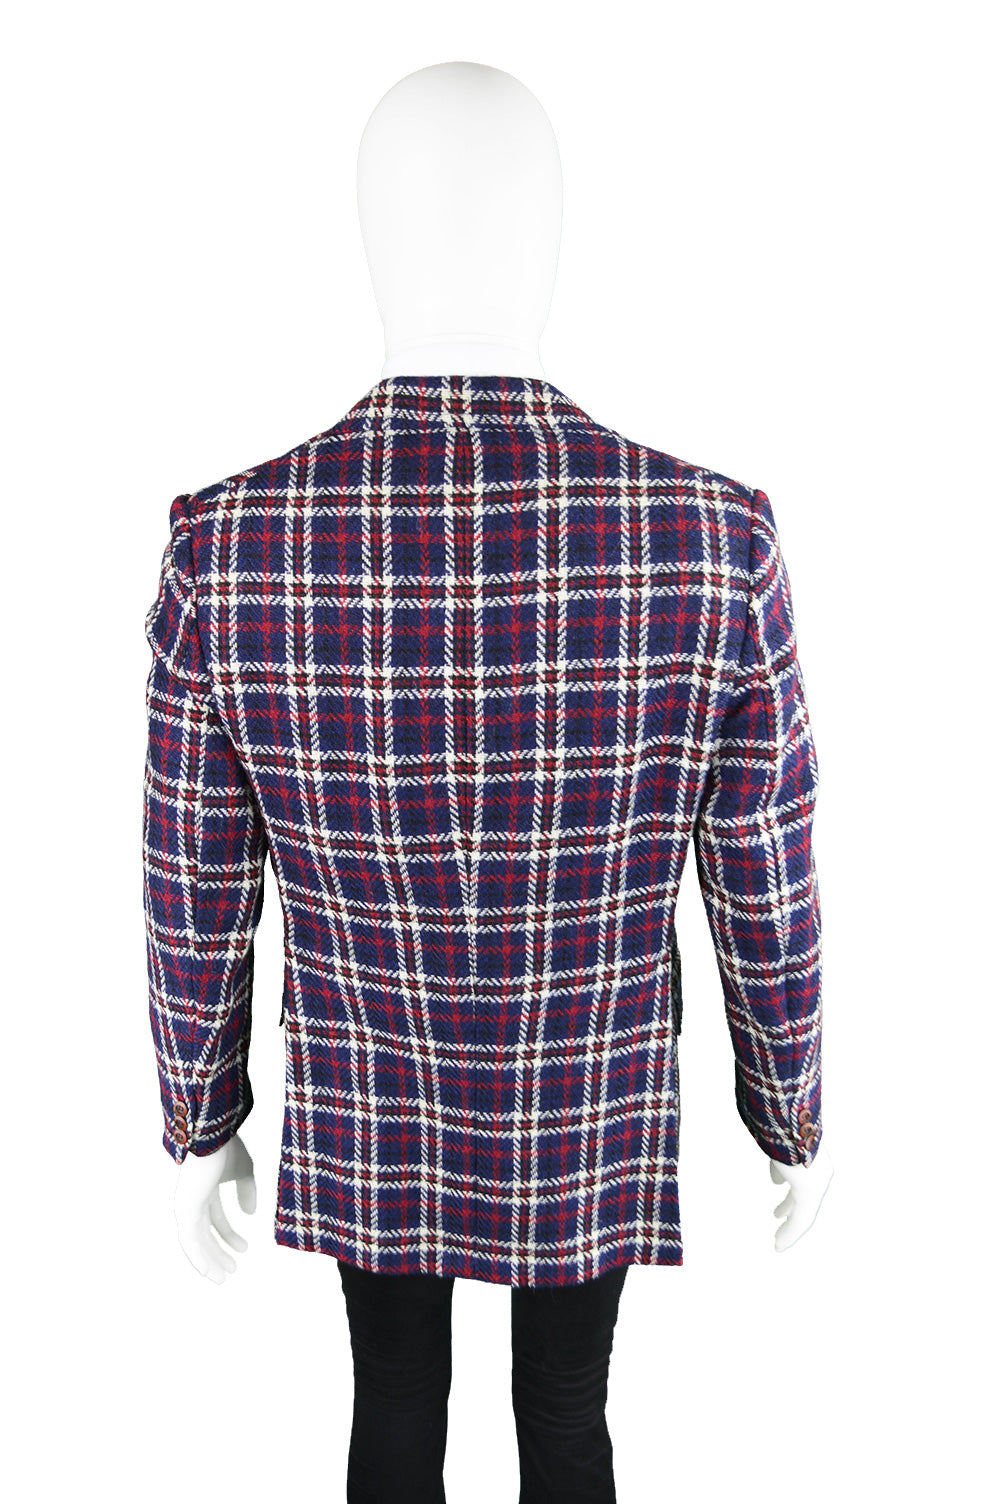 Preowned Blue, White & Red Vintage Checked Jacket, 1960s